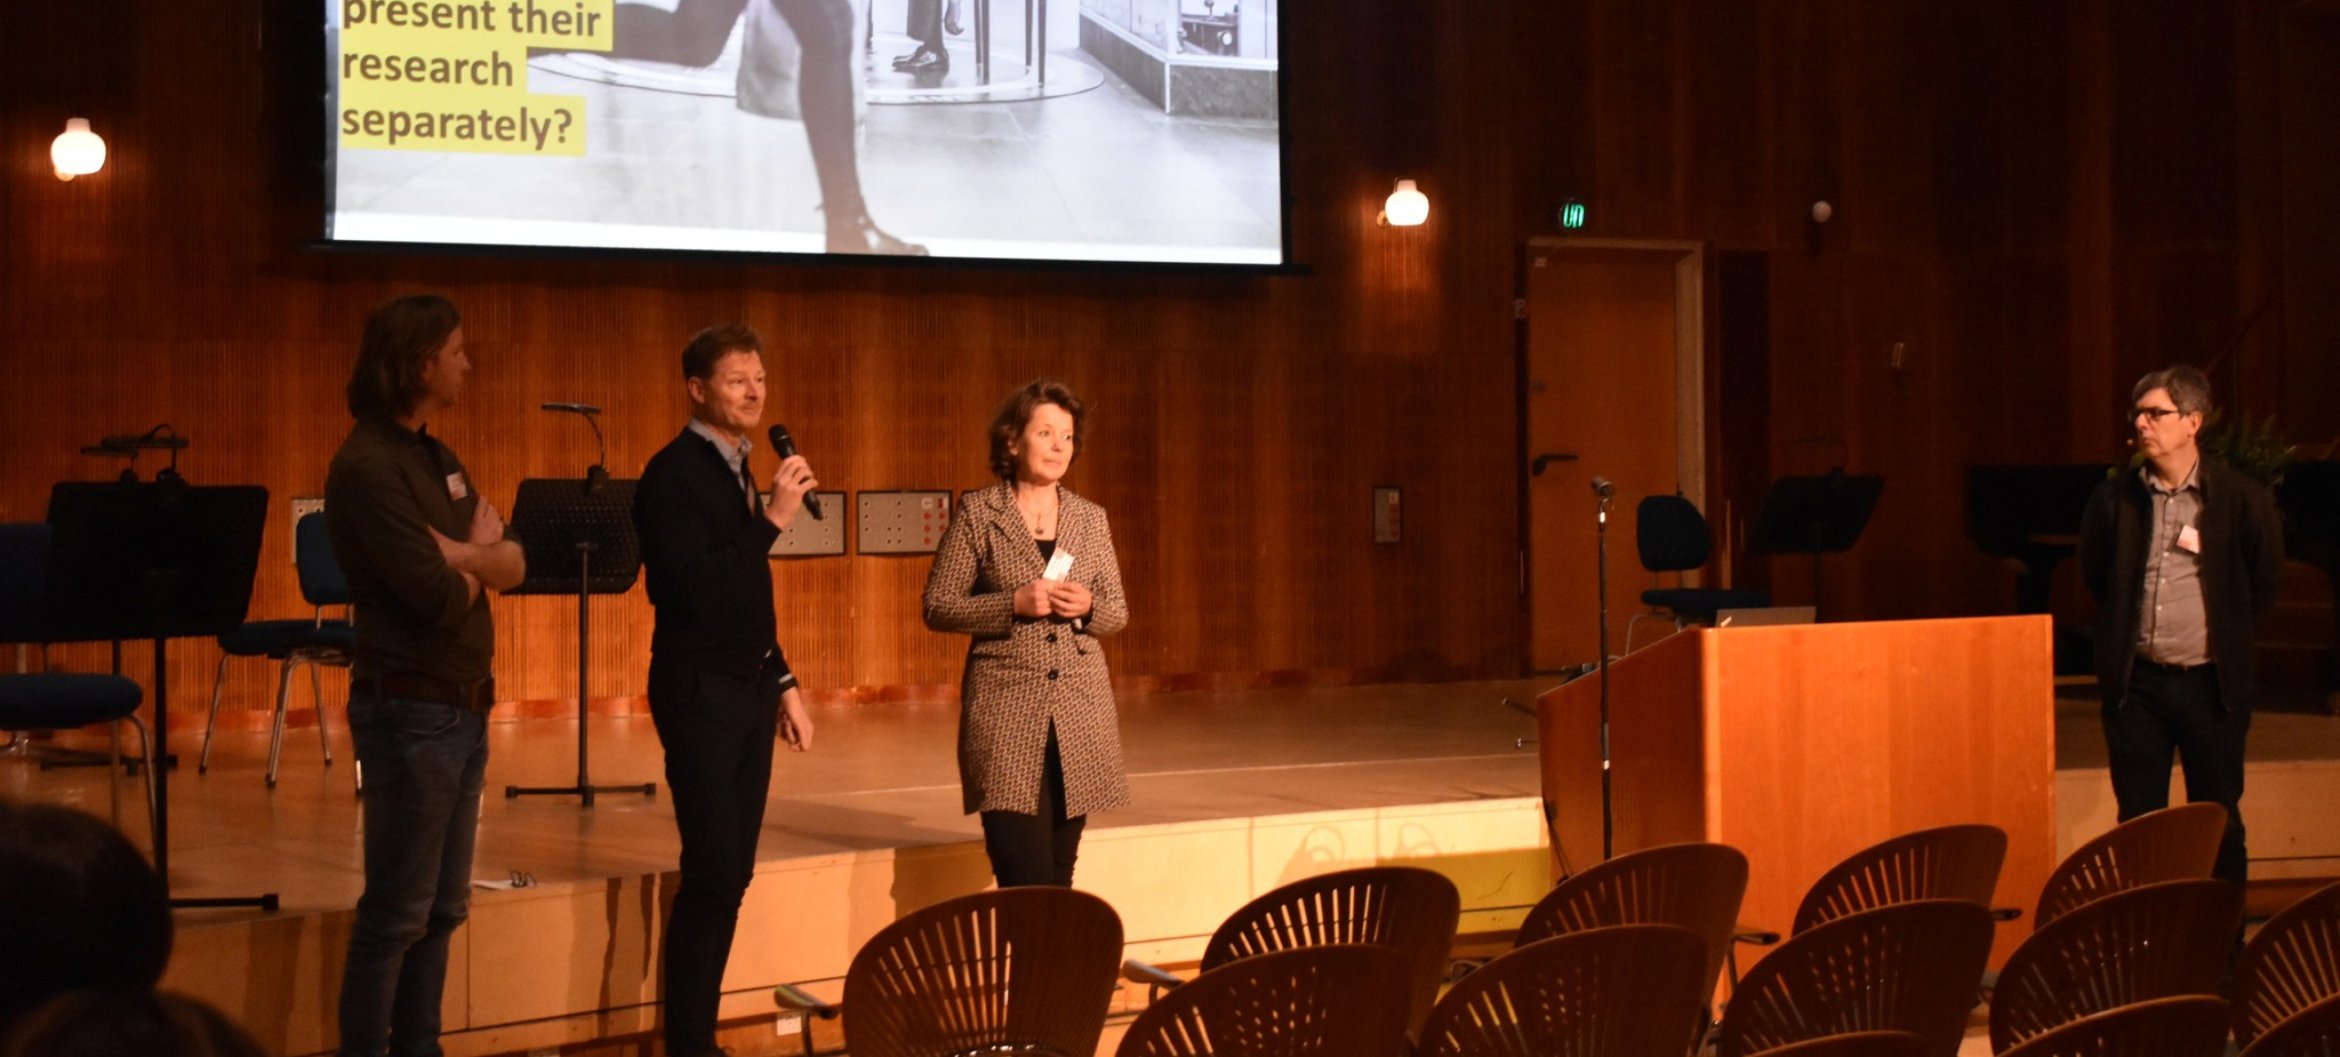 From left to right: Rik Cornelissen (research coach at the Academy of Music in Arnhem), Steven Faber (research coach at the Academy of Music in Zwolle), and Annemarie Reitsma (head of master&#039;s courses in music) during a conference in Copenhagen.